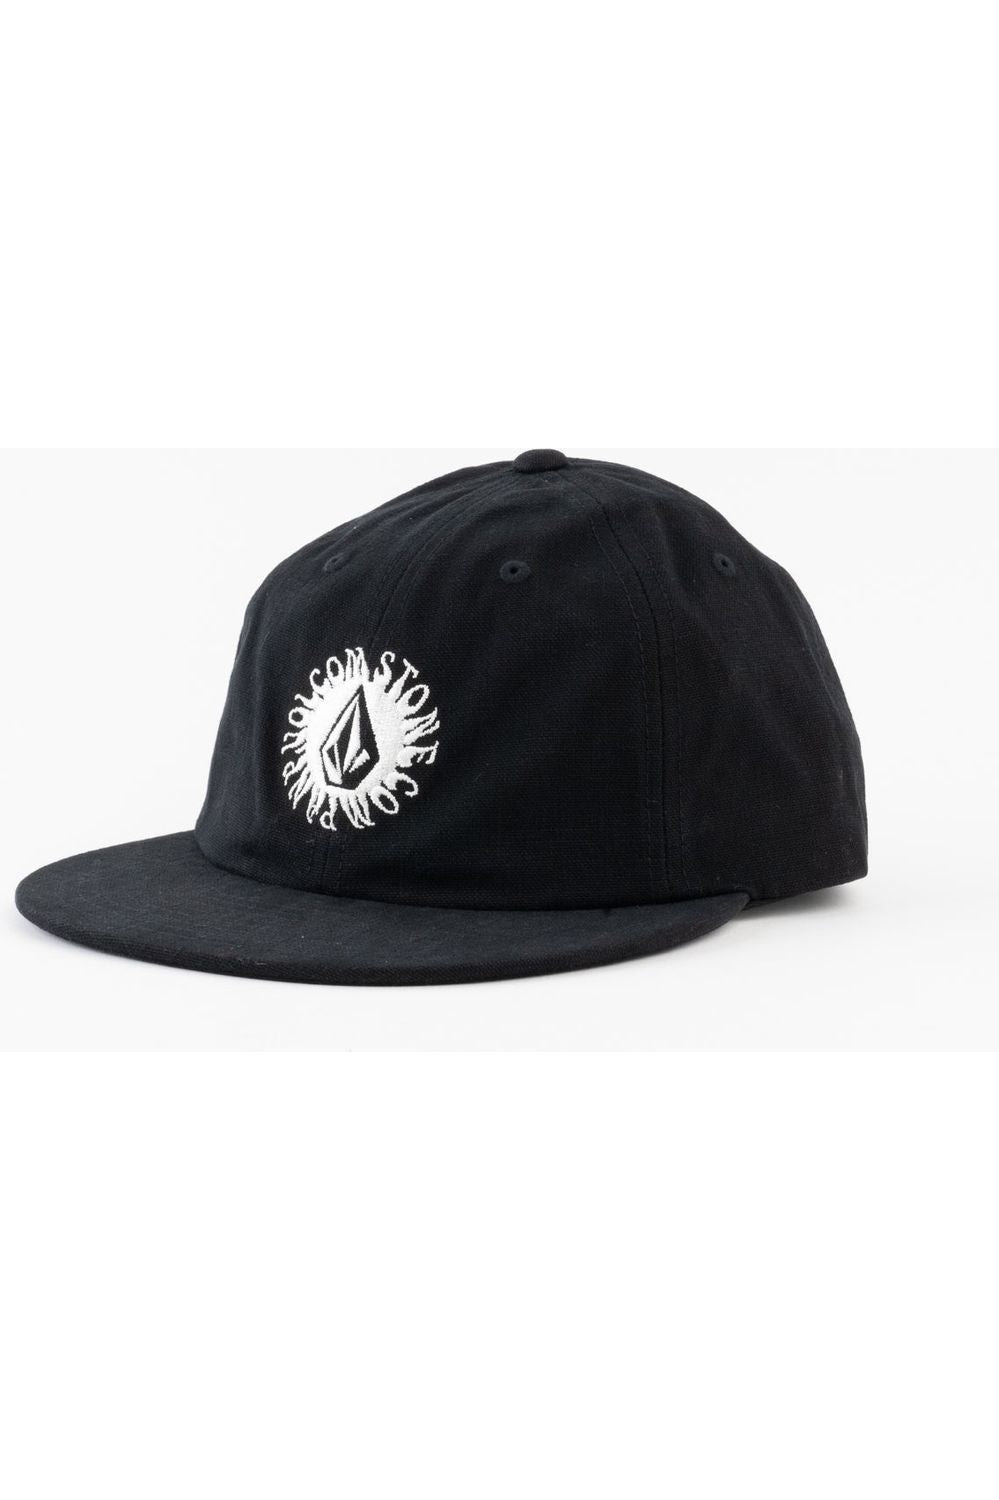 Volcom Tregritty Since 91 Adjustable